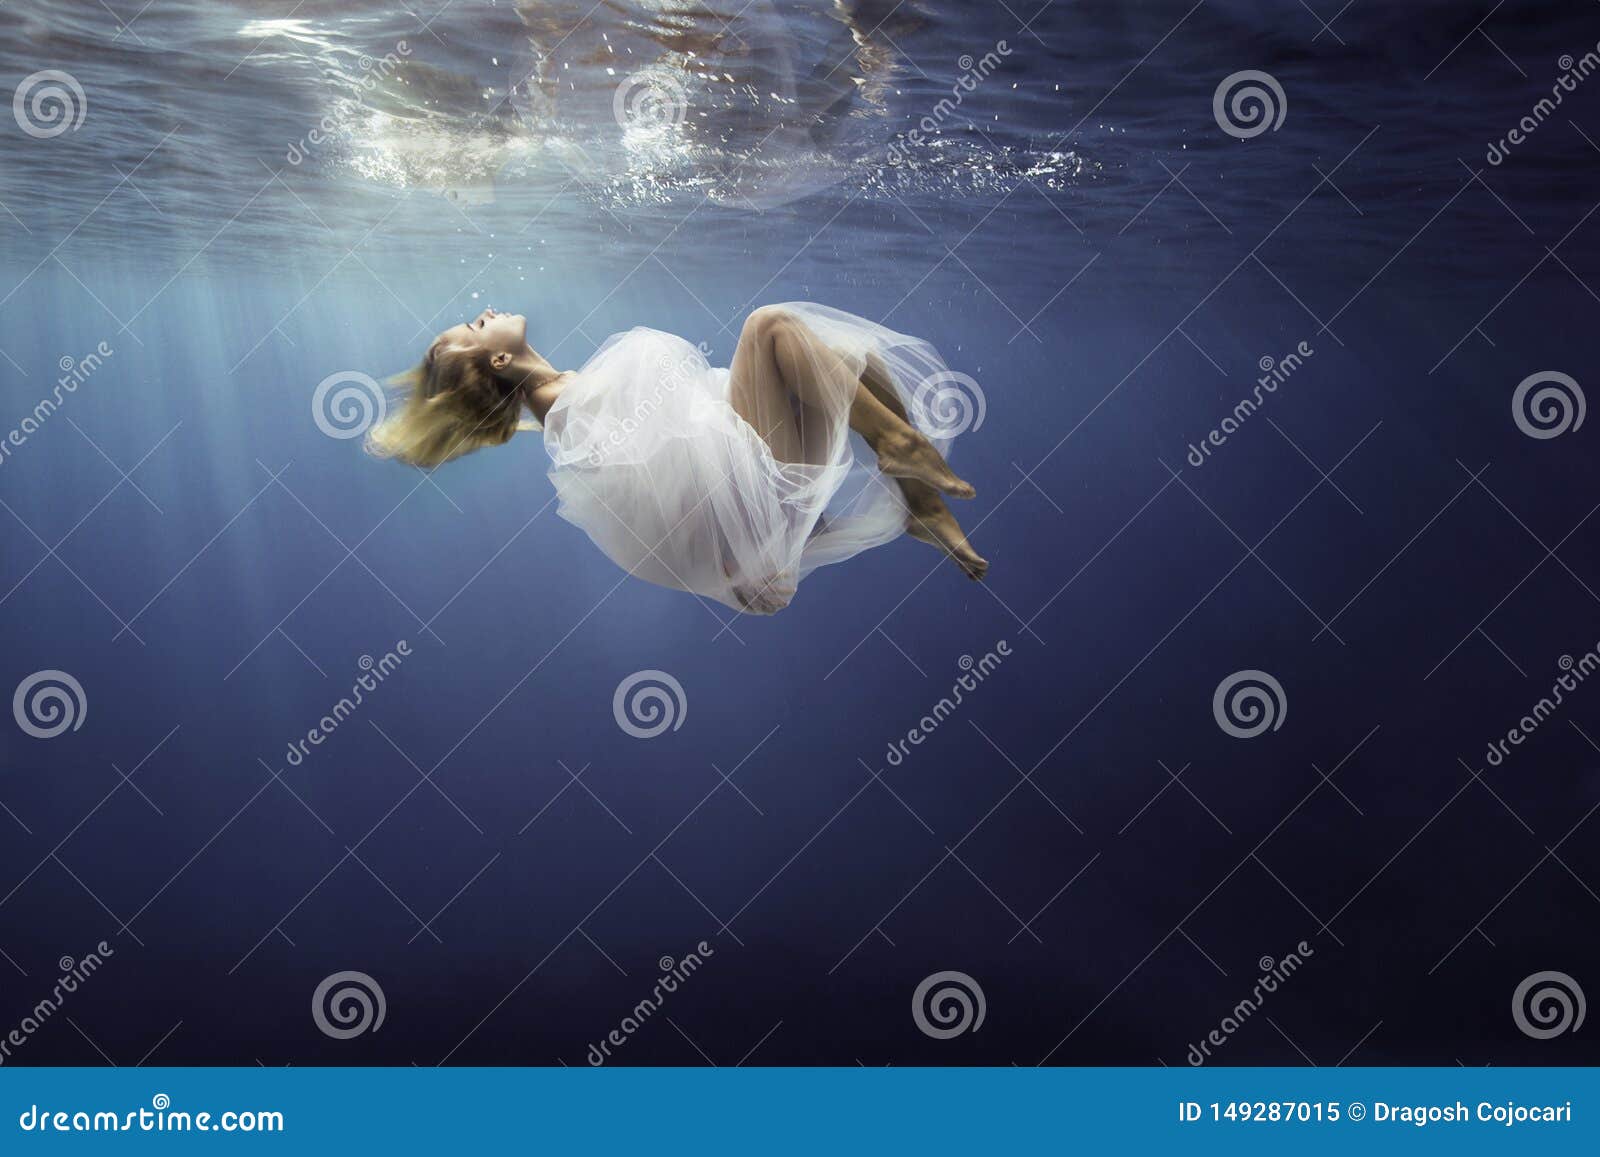 Blonde Girl Wrapped In Fine White Cloth, Sank In Blue Deep Water Of ...